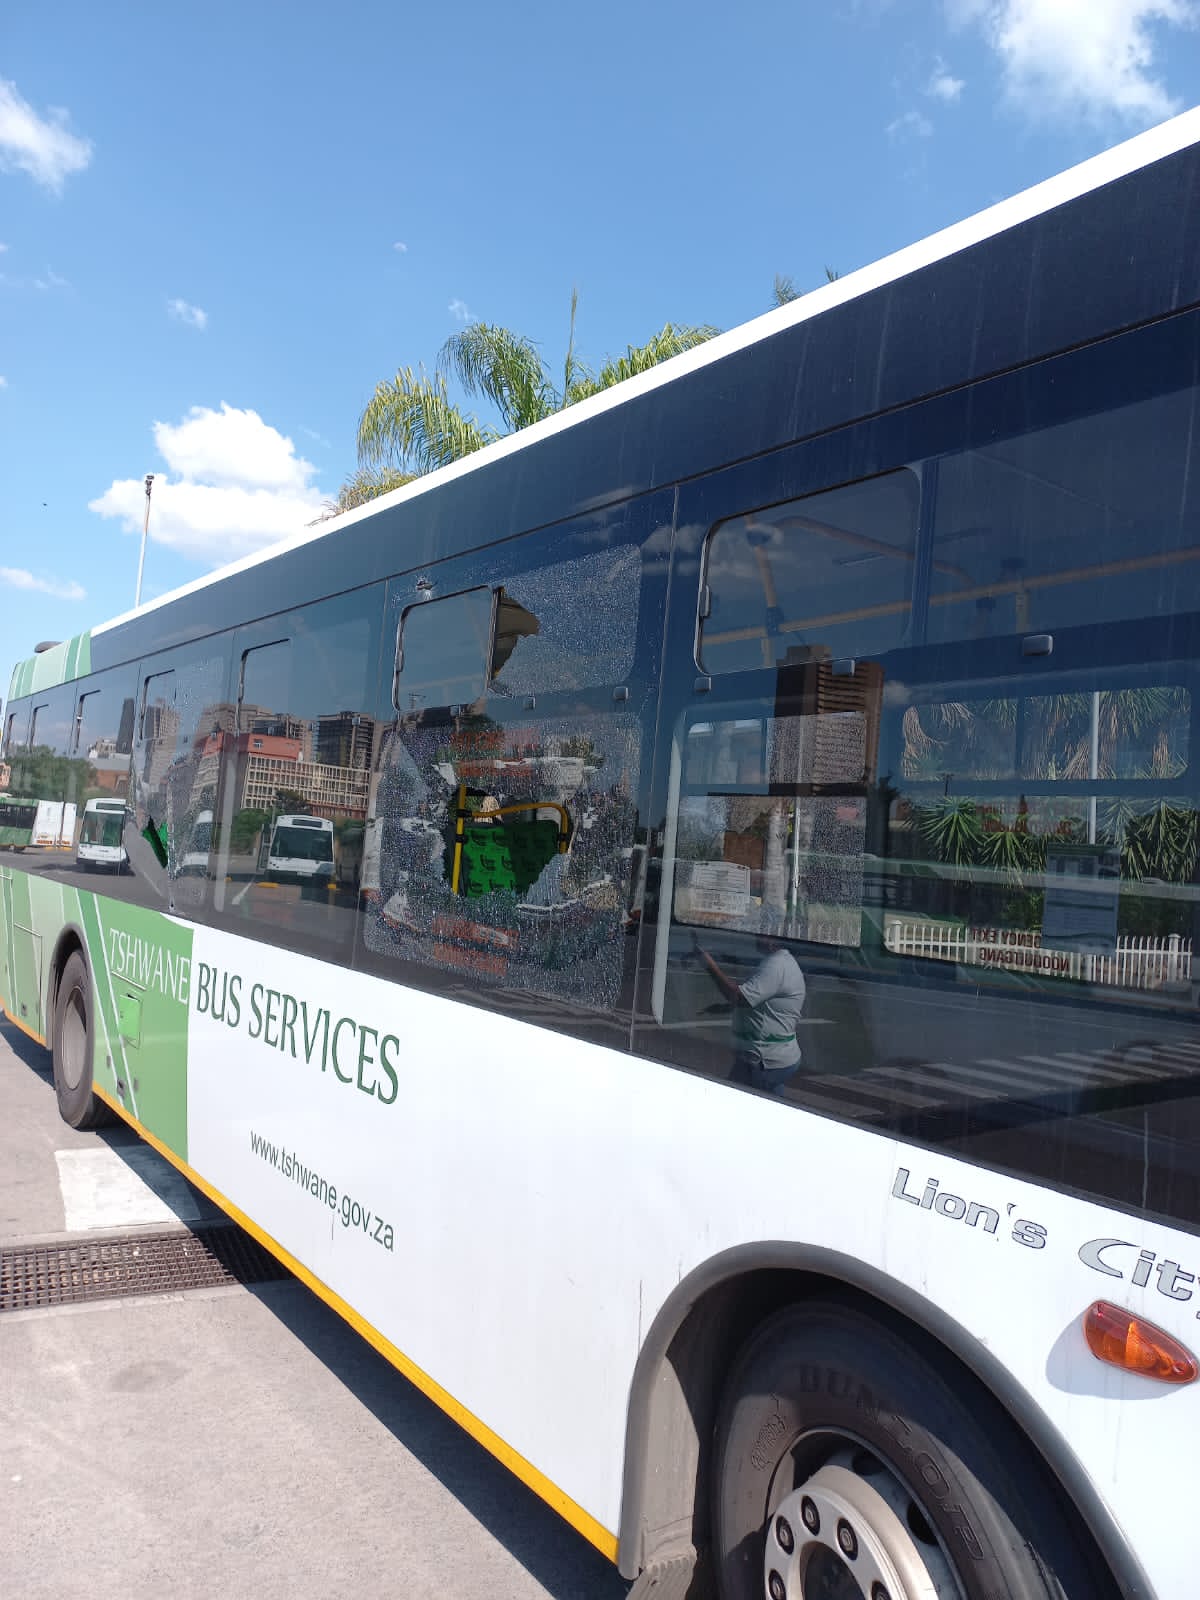 Tshwane bus services pelted with stone in Pretoria